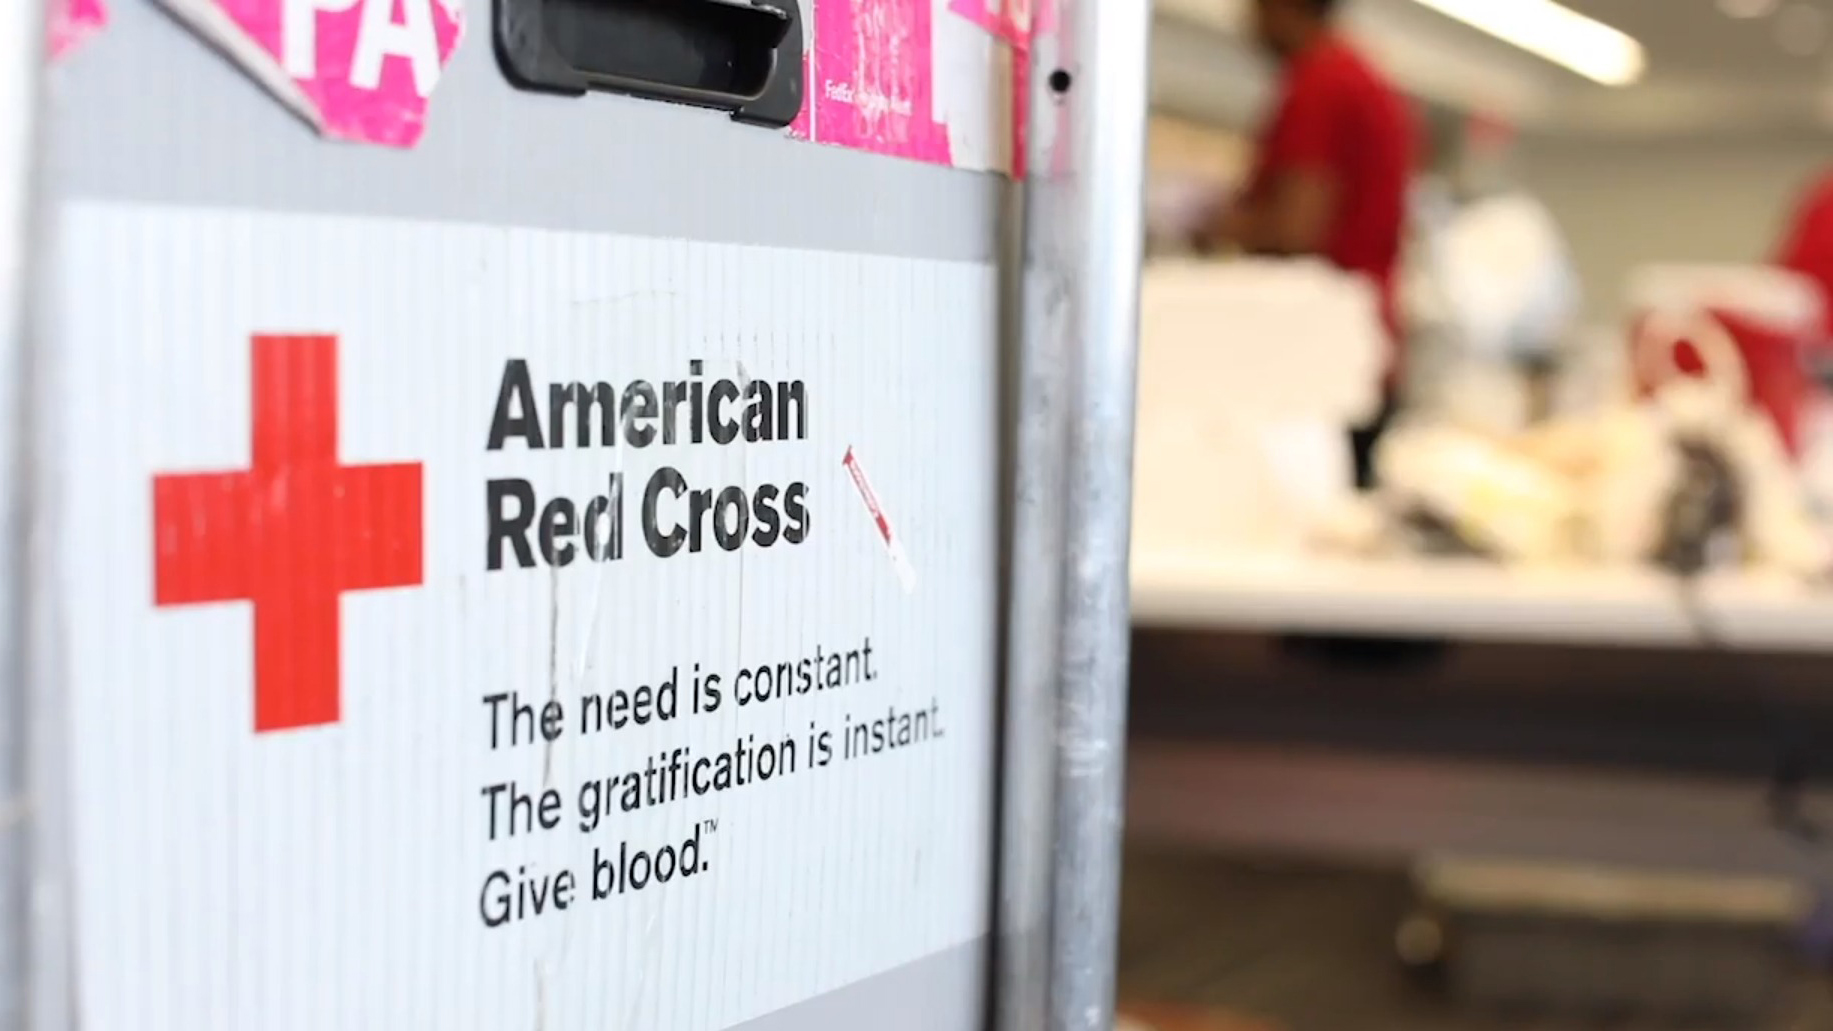 An American Red Cross sign